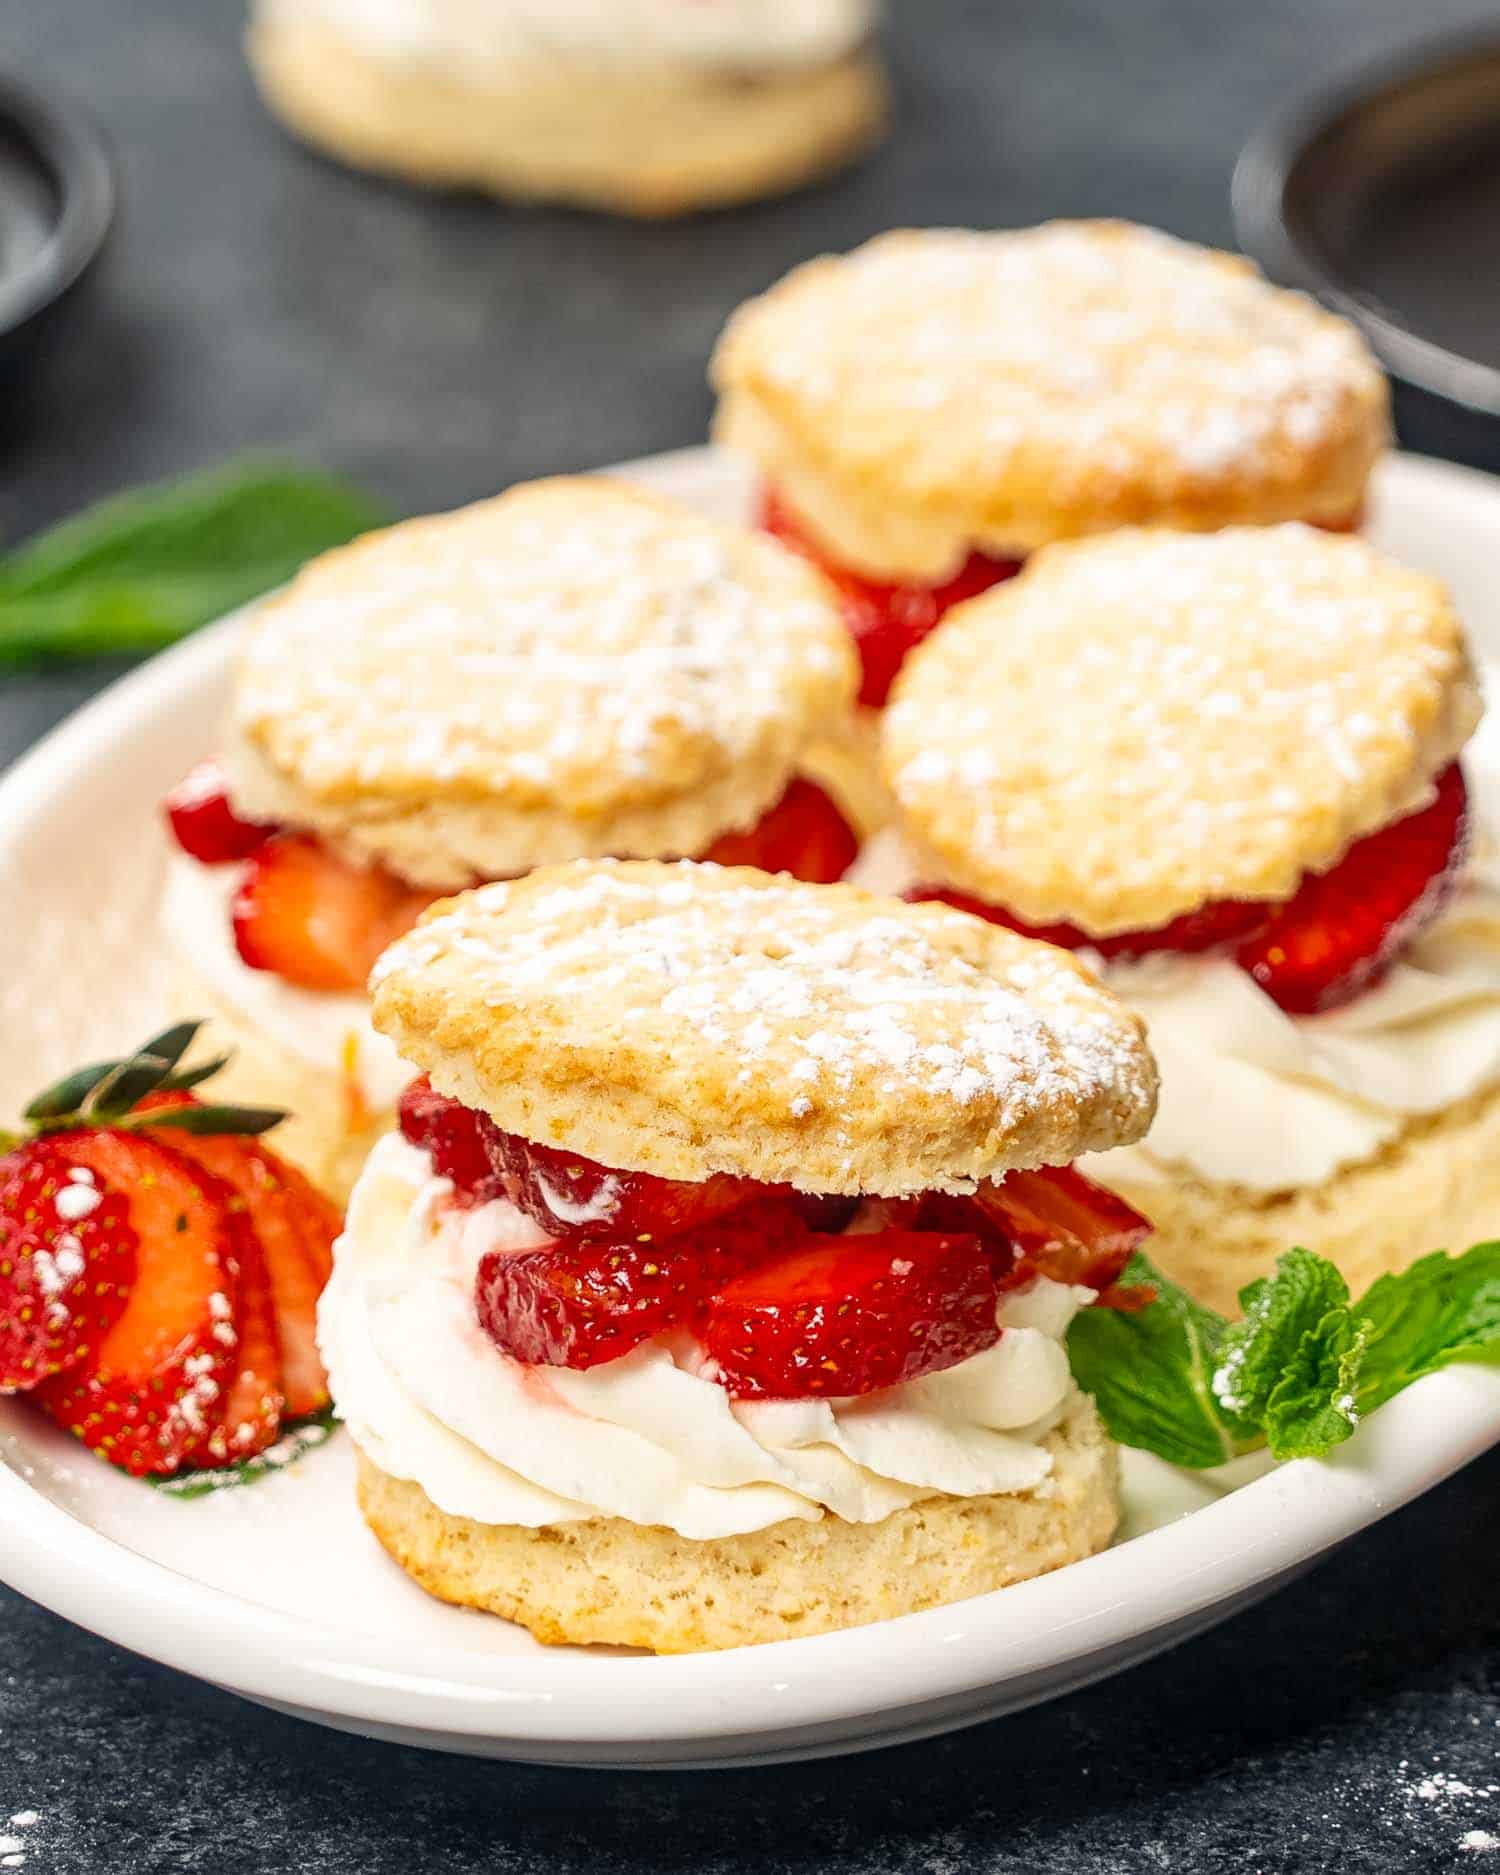 a few strawberry shortcakes on a white platter sprinkled with powdered sugar.